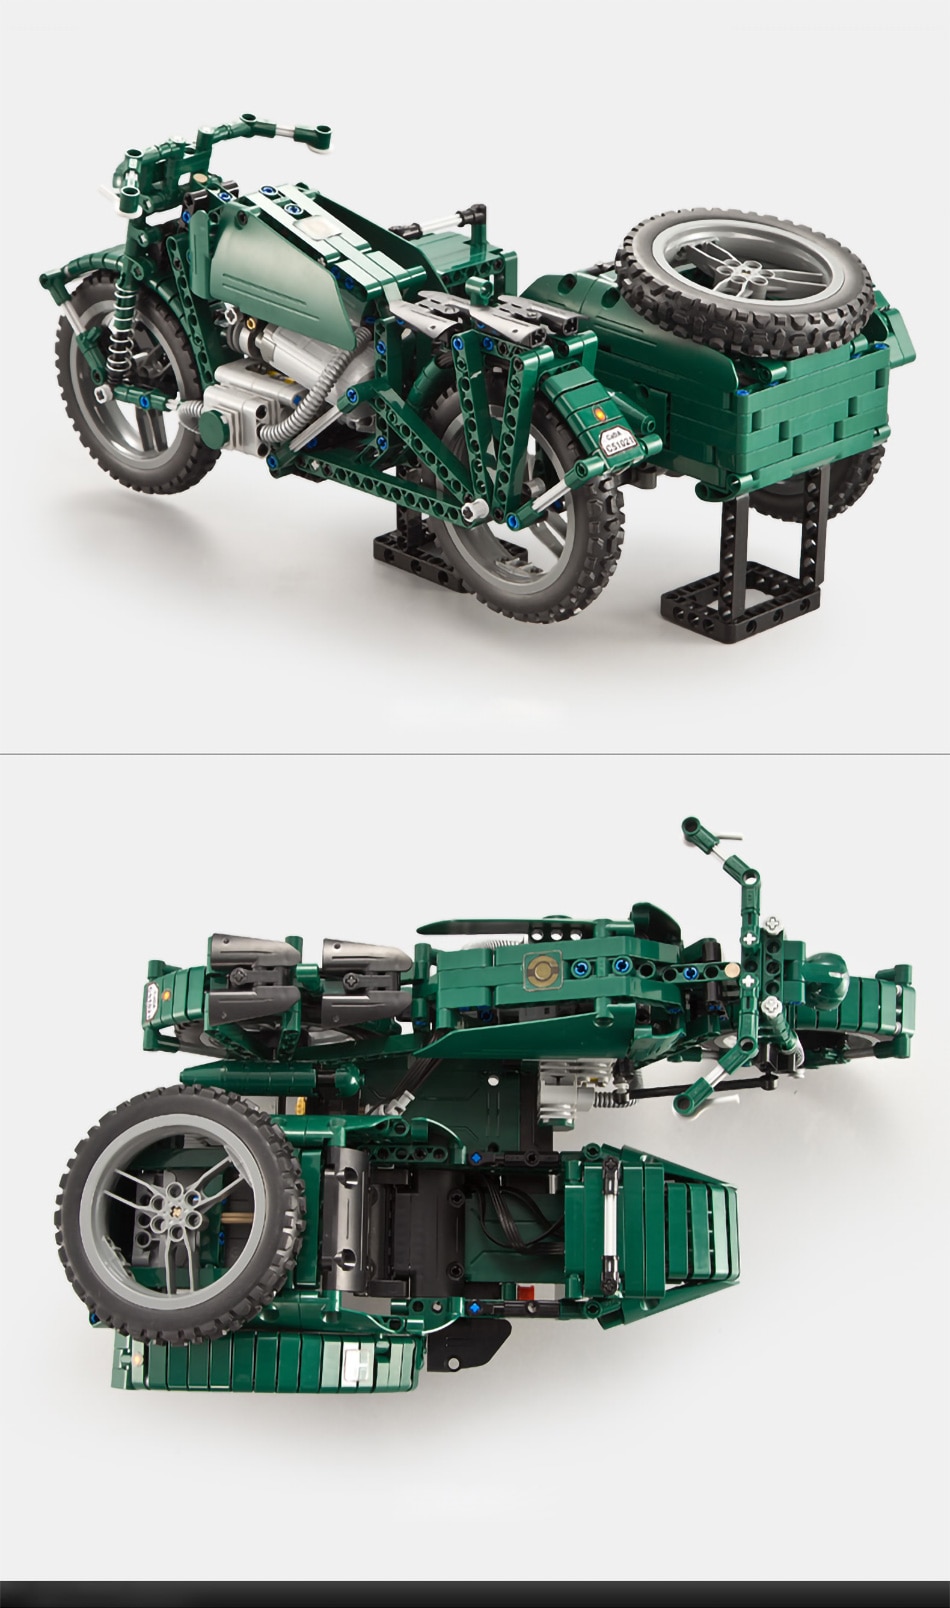 629pcs-WW2-Military-Series-RC-Motorcycle-Compatible-Legoingly-Technic-Building-Blocks-Bricks-Model-Army-Soldiers-Weapon-Vehicles-32971862434